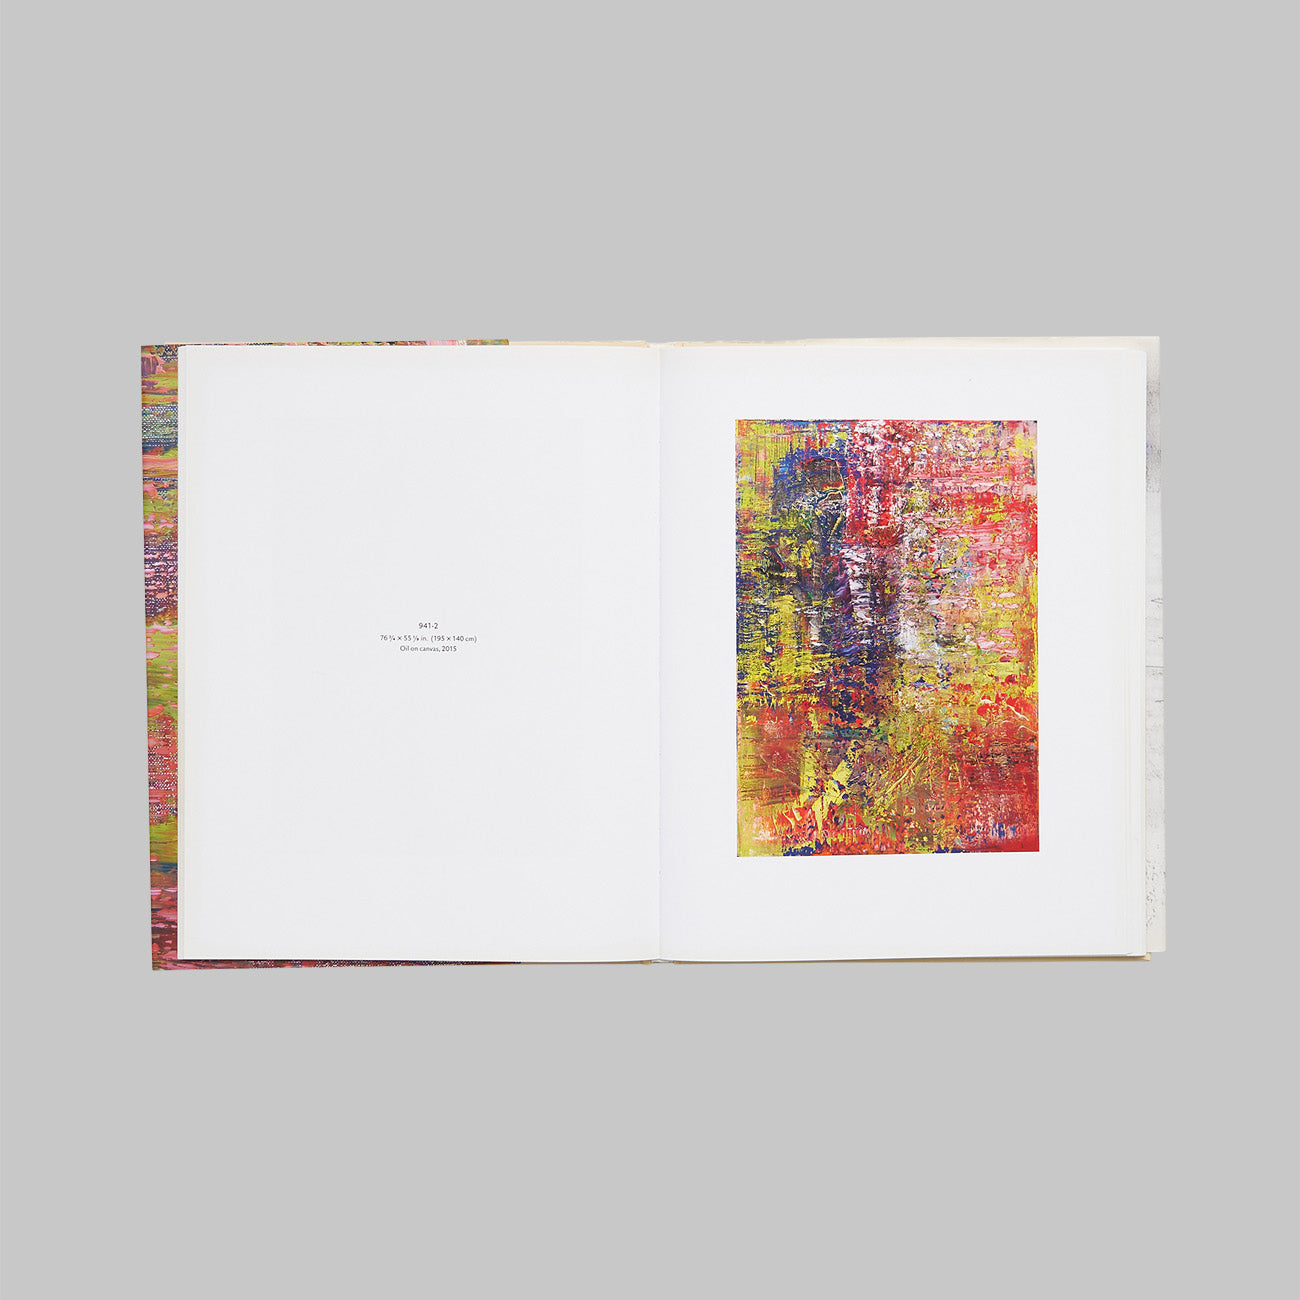 ABSTRACT PAINTINGS AND DRAWINGS / Gerhard Richter